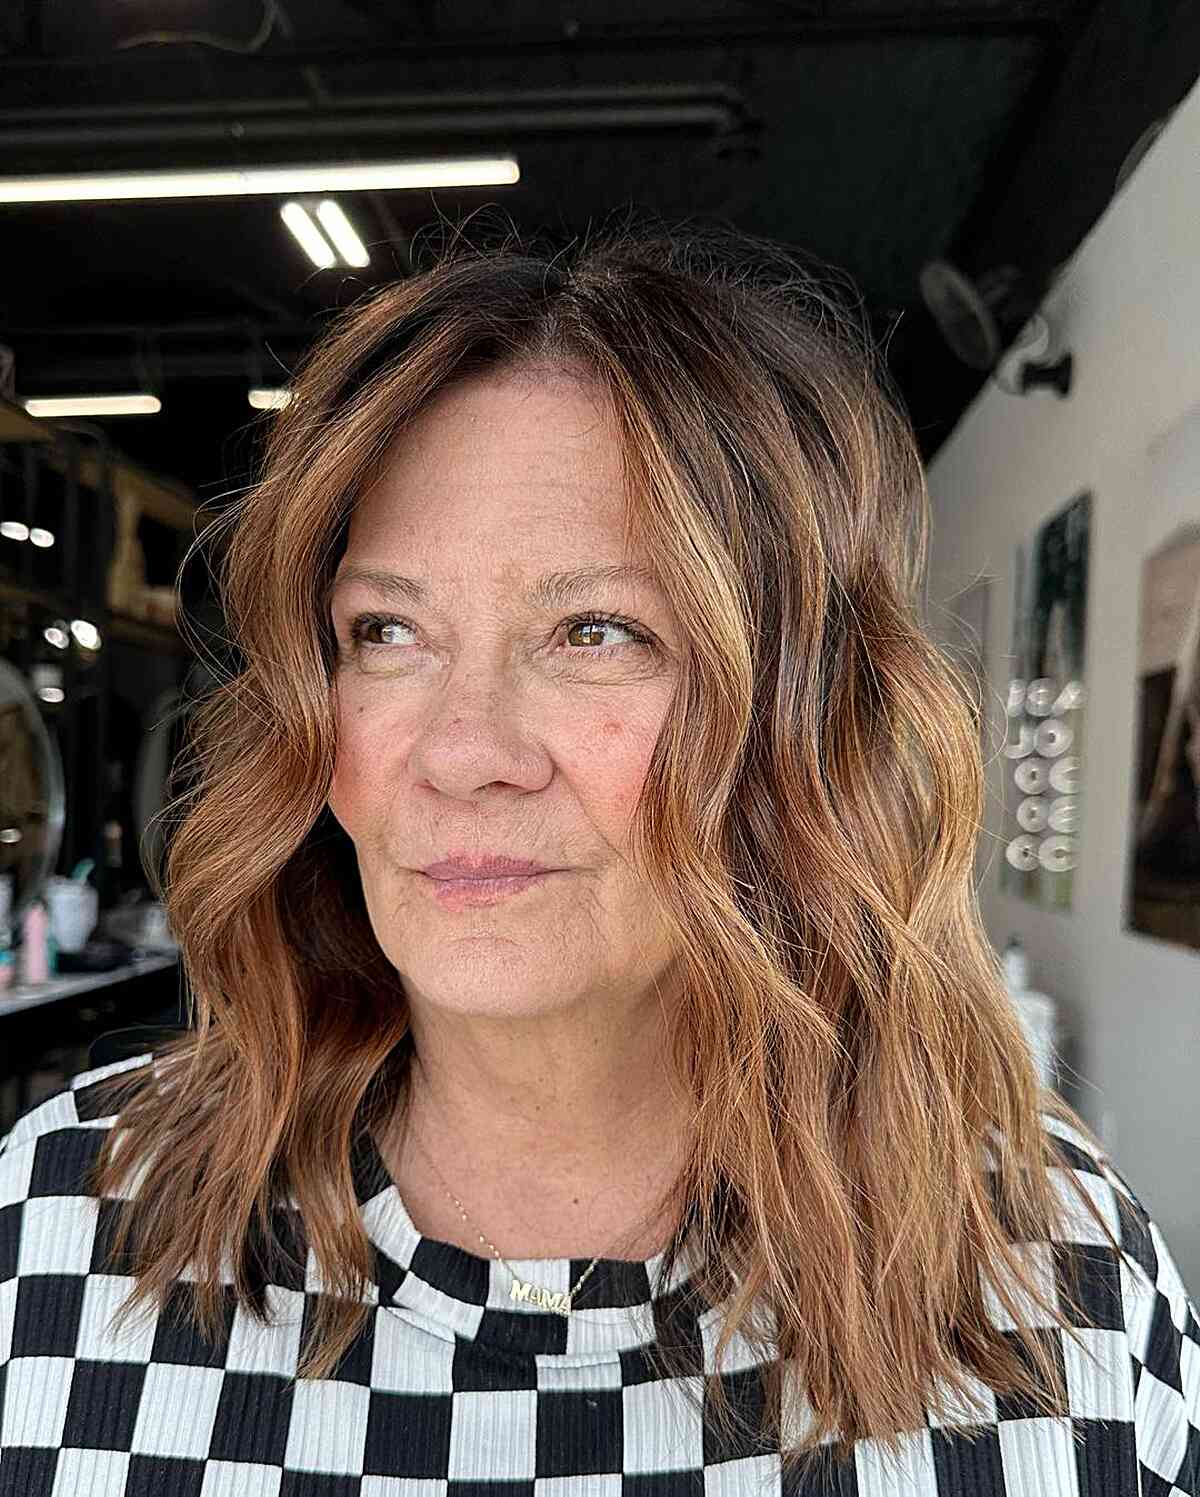 Fall Cinnamon Brown Highlights and Mid-Length Beach Waves for Women Aged 50